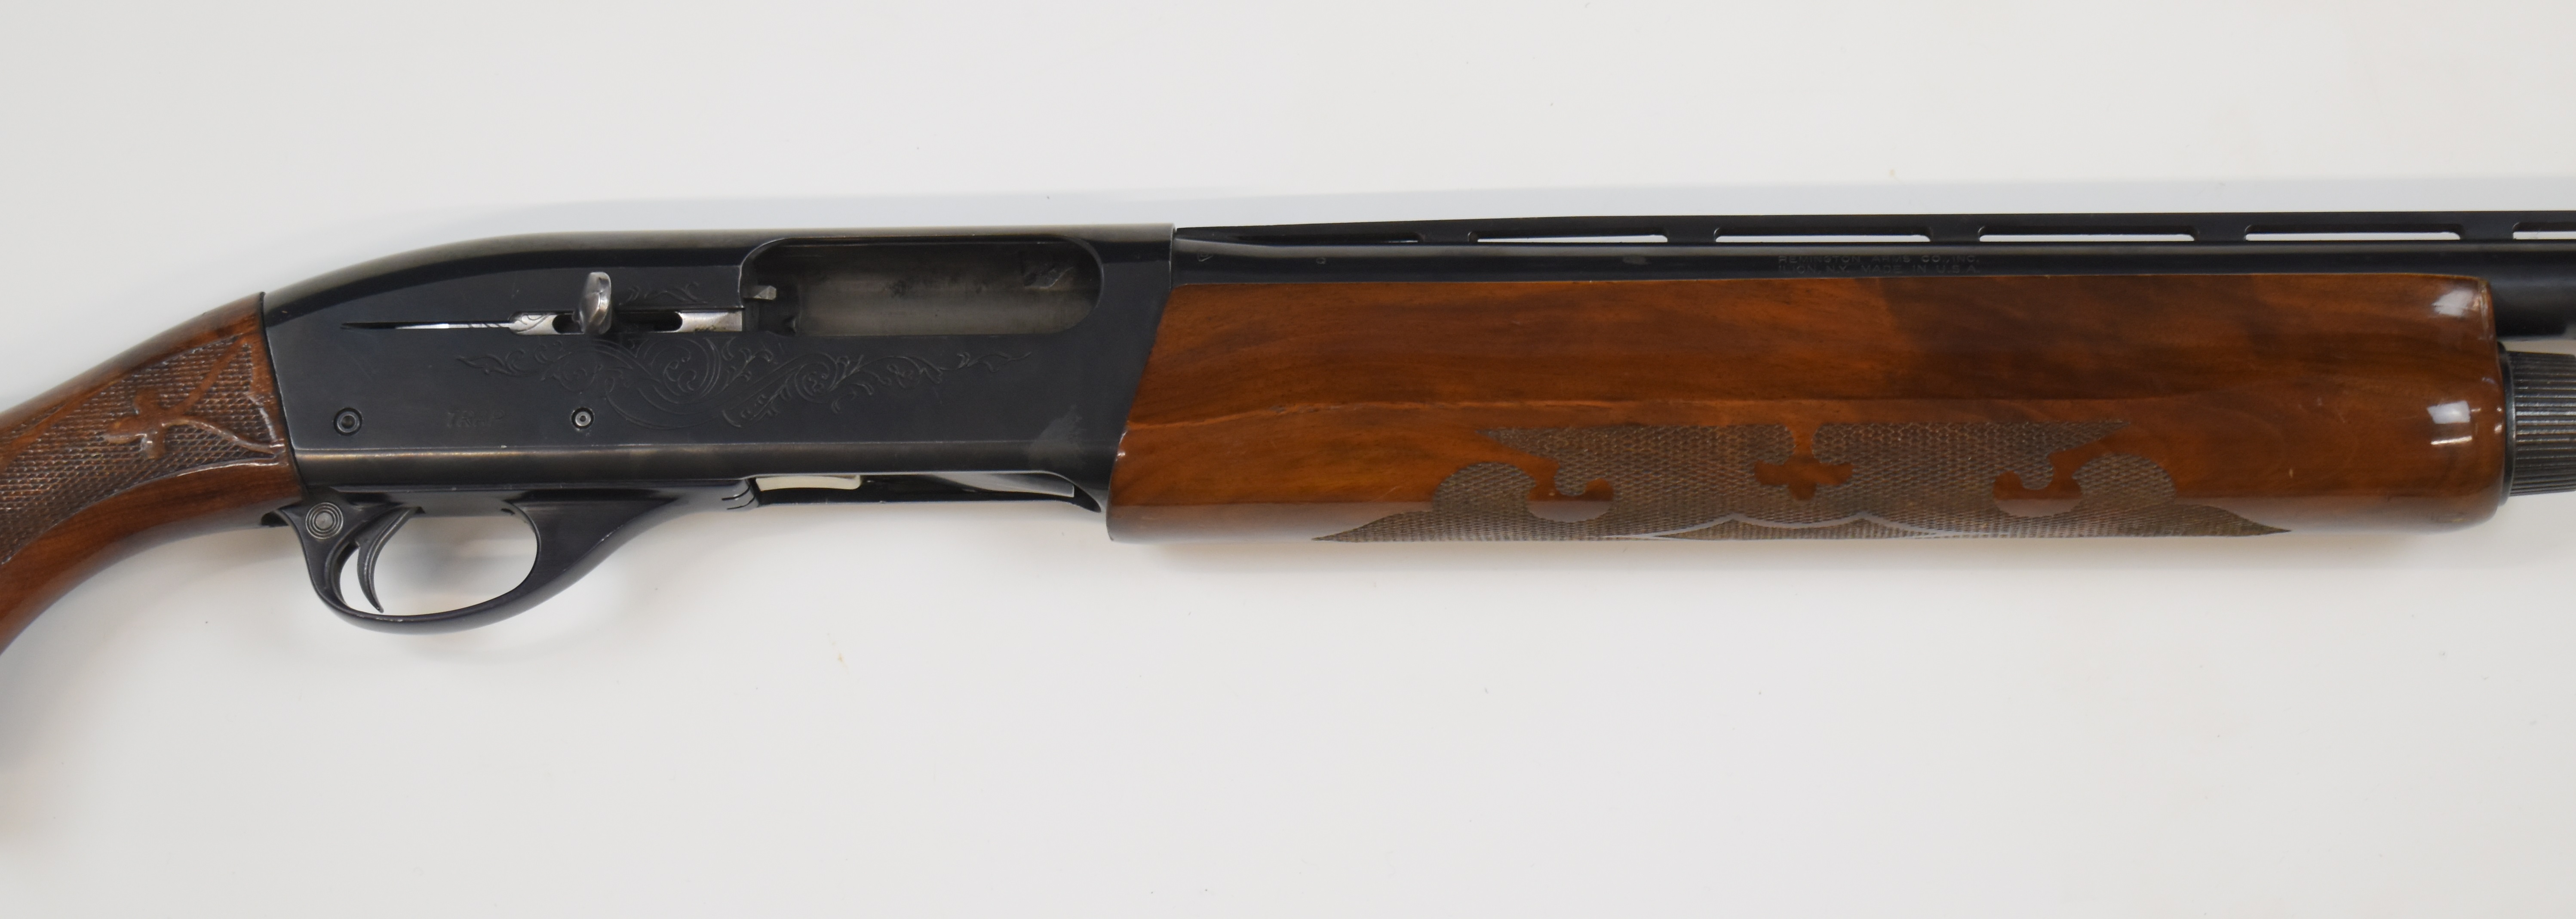 Remington Model 1100 Trap 12 bore 3-shot semi-automatic shotgun with ornately carved and chequered - Image 4 of 11